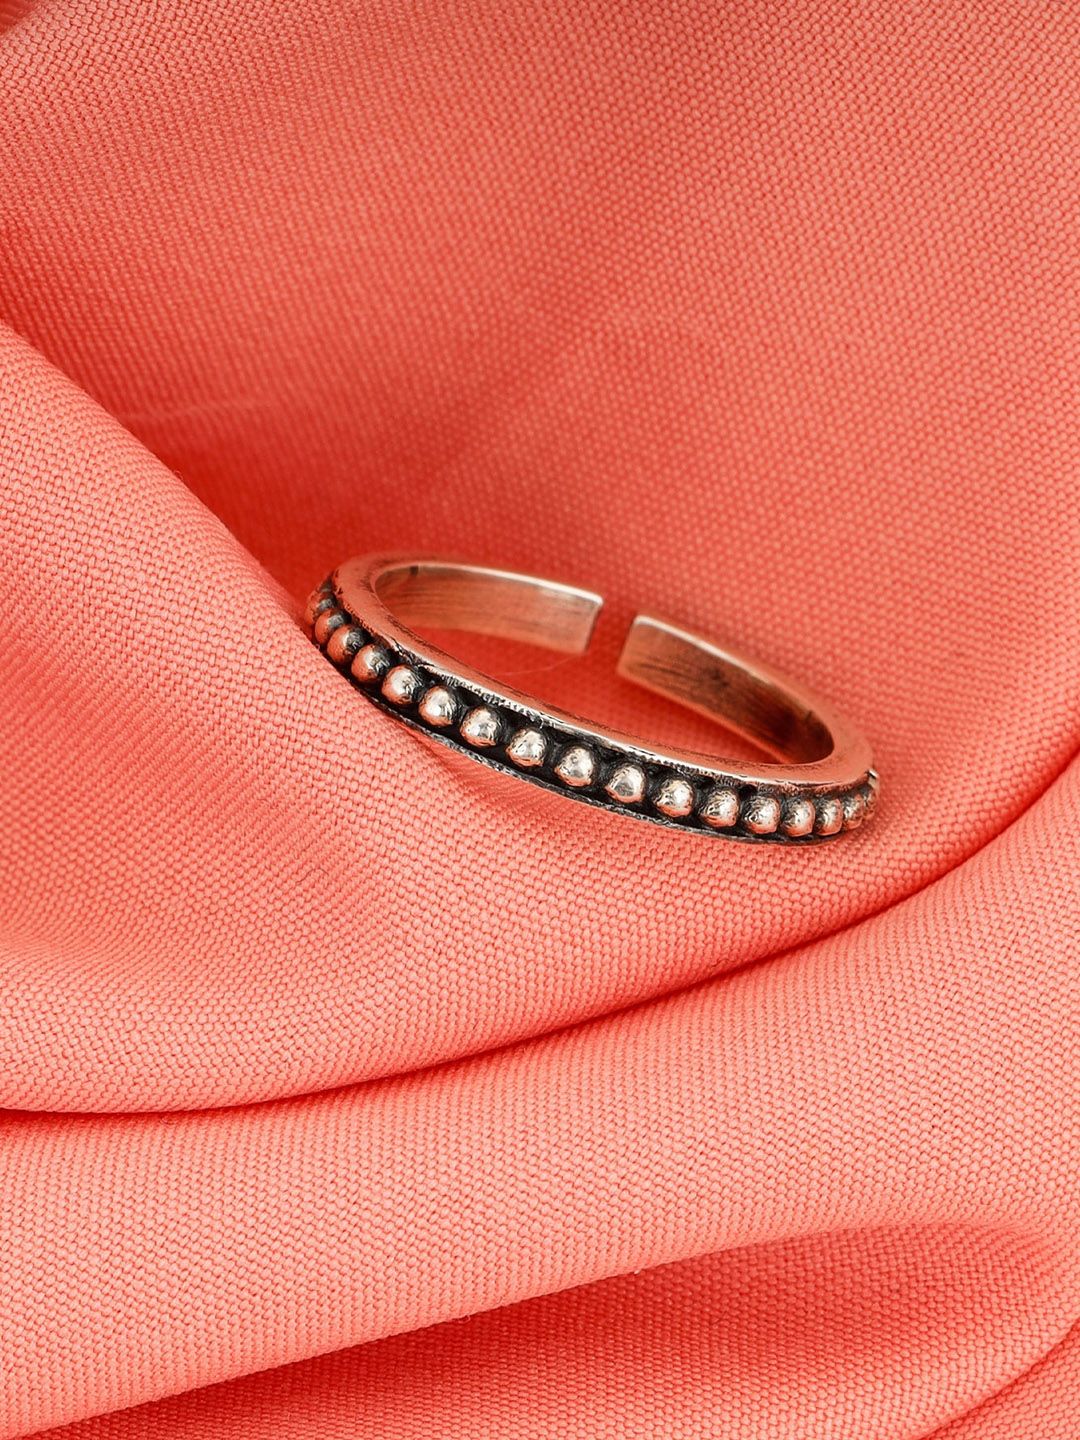 GIVA 925 Sterling Silver-Toned Oxidized Adjustable Finger Ring Price in India